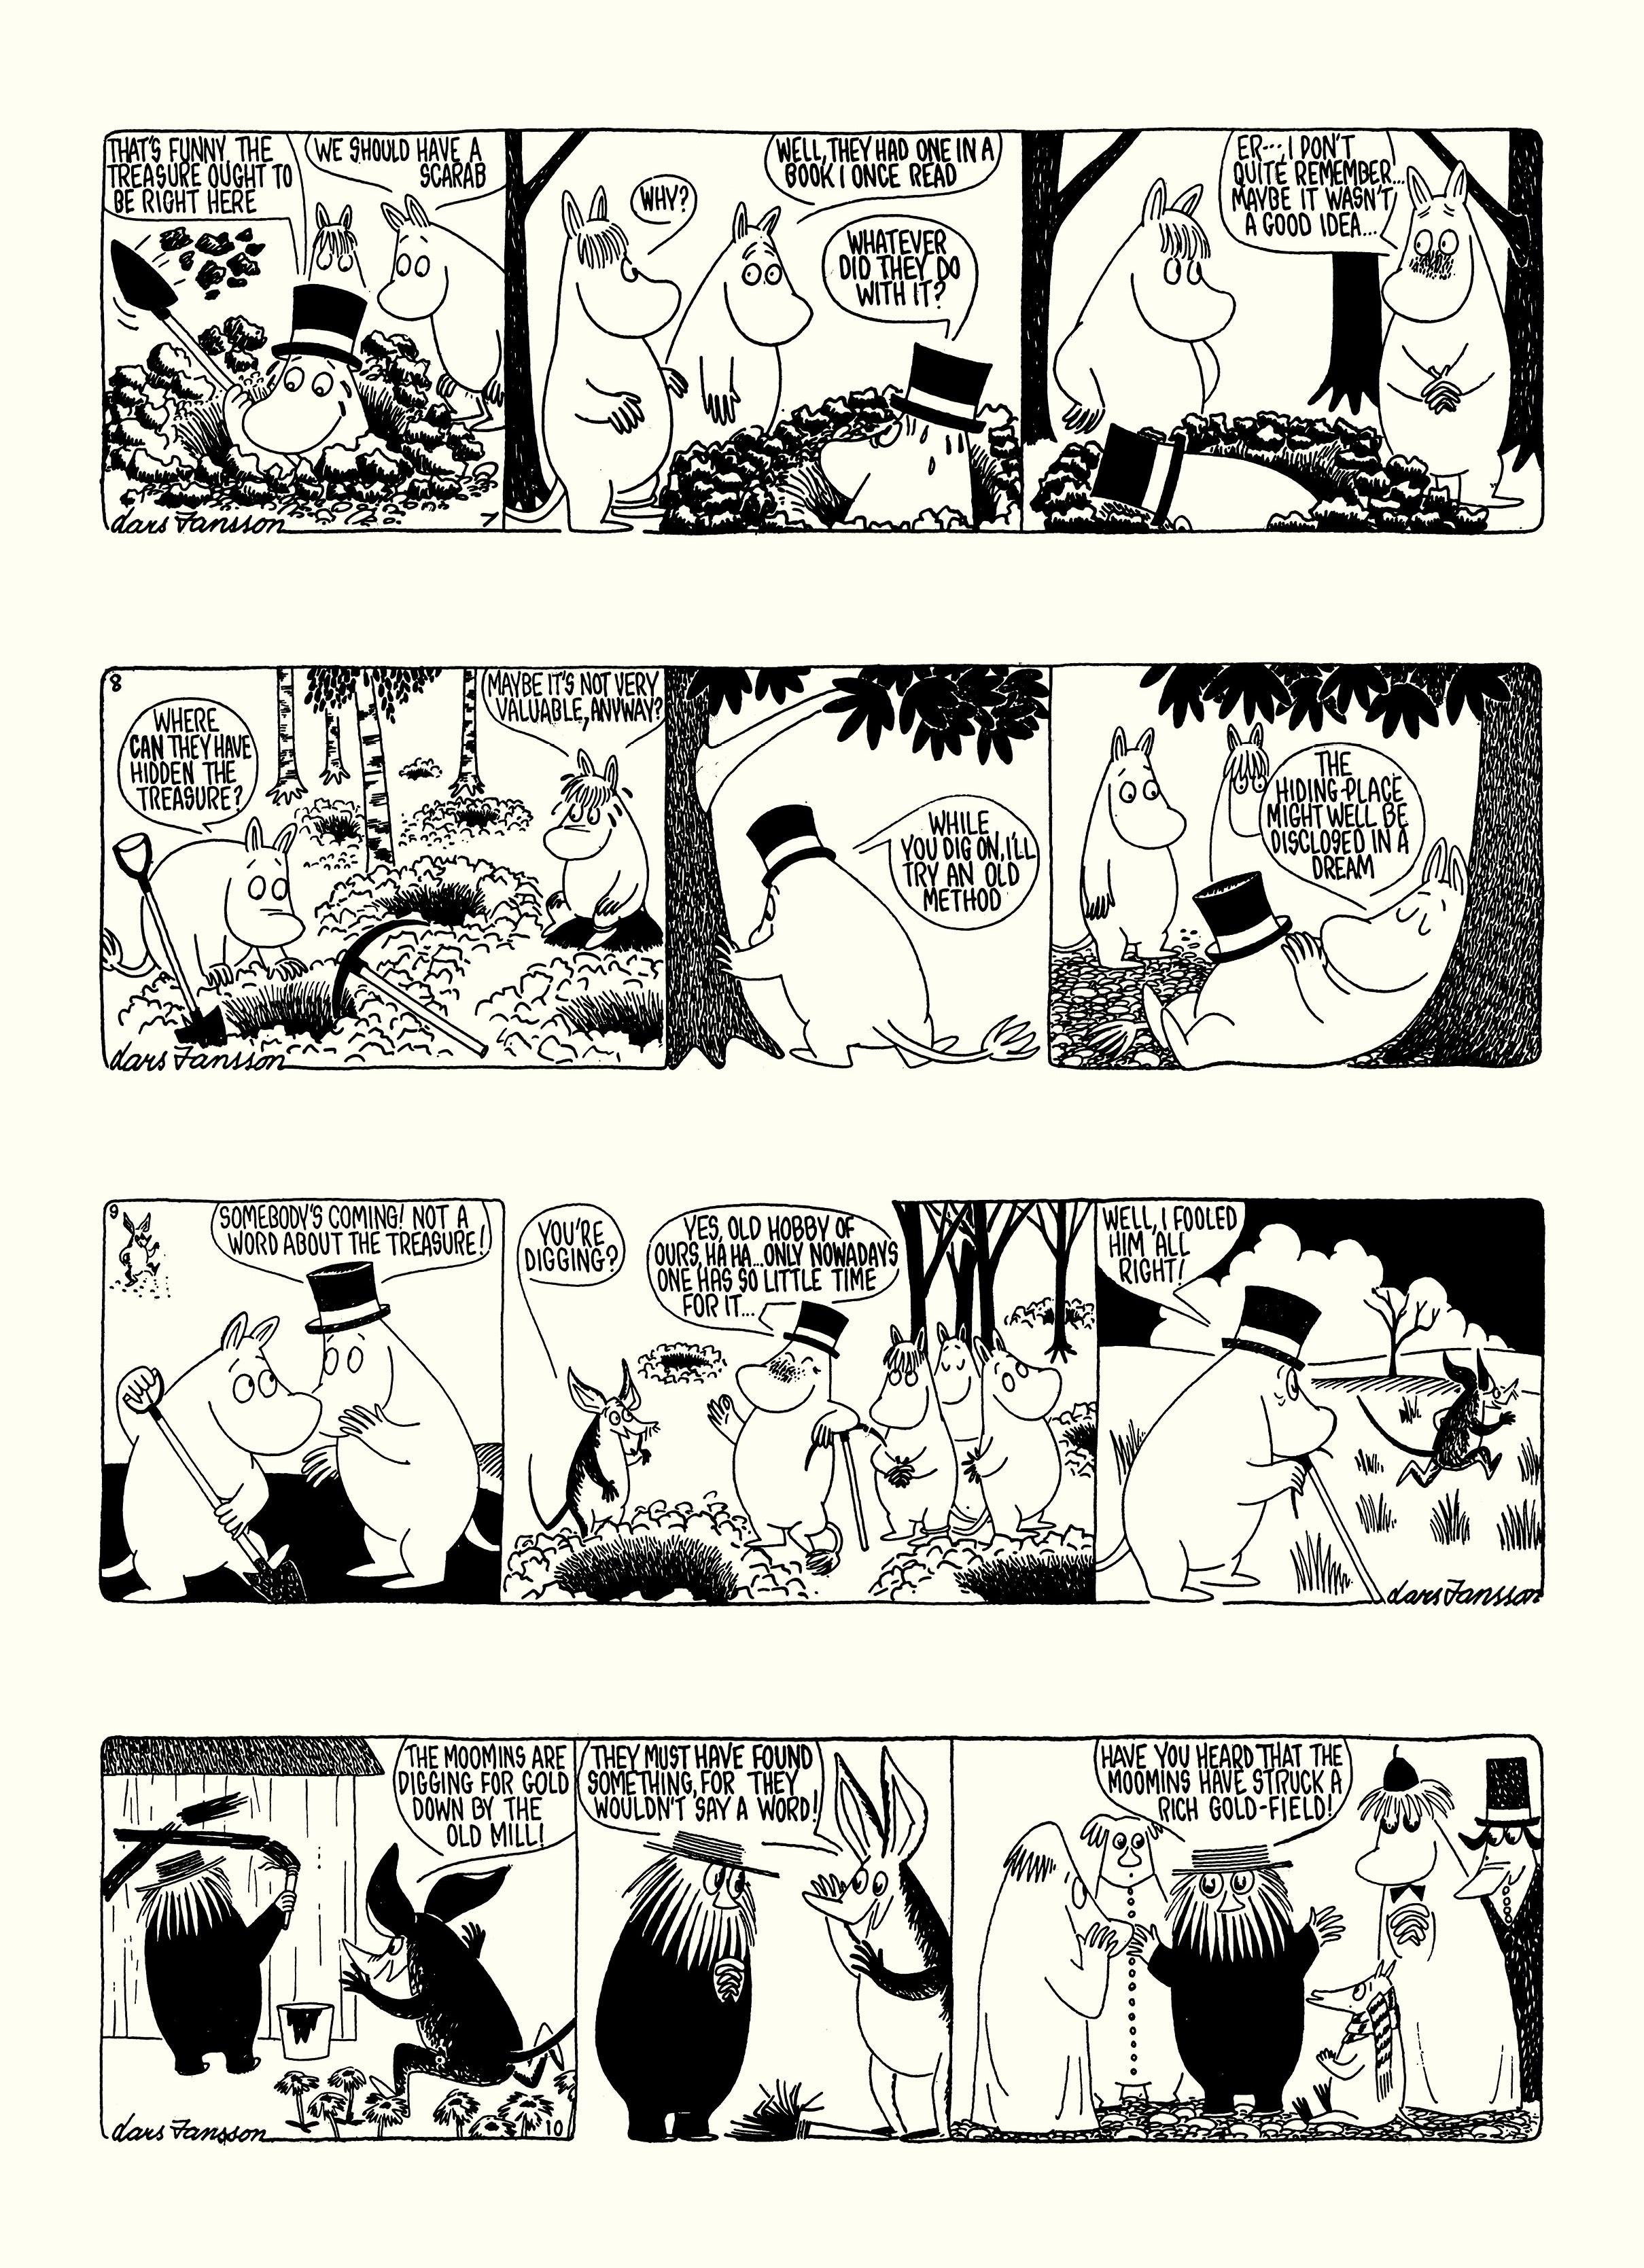 Read online Moomin: The Complete Lars Jansson Comic Strip comic -  Issue # TPB 7 - 71